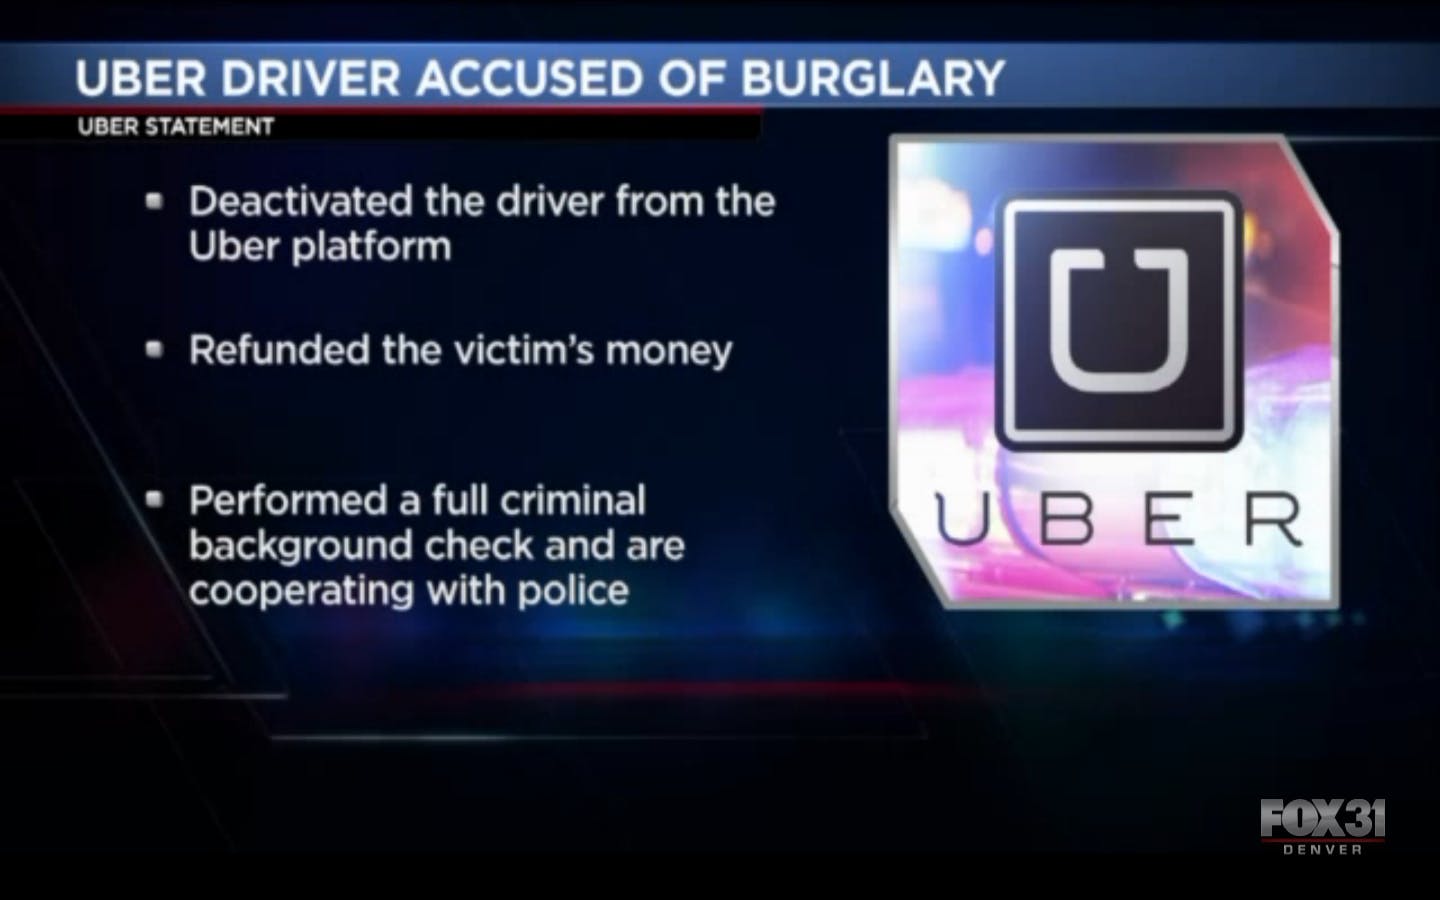 Uber swung into action as soon as it realized something was wrong.